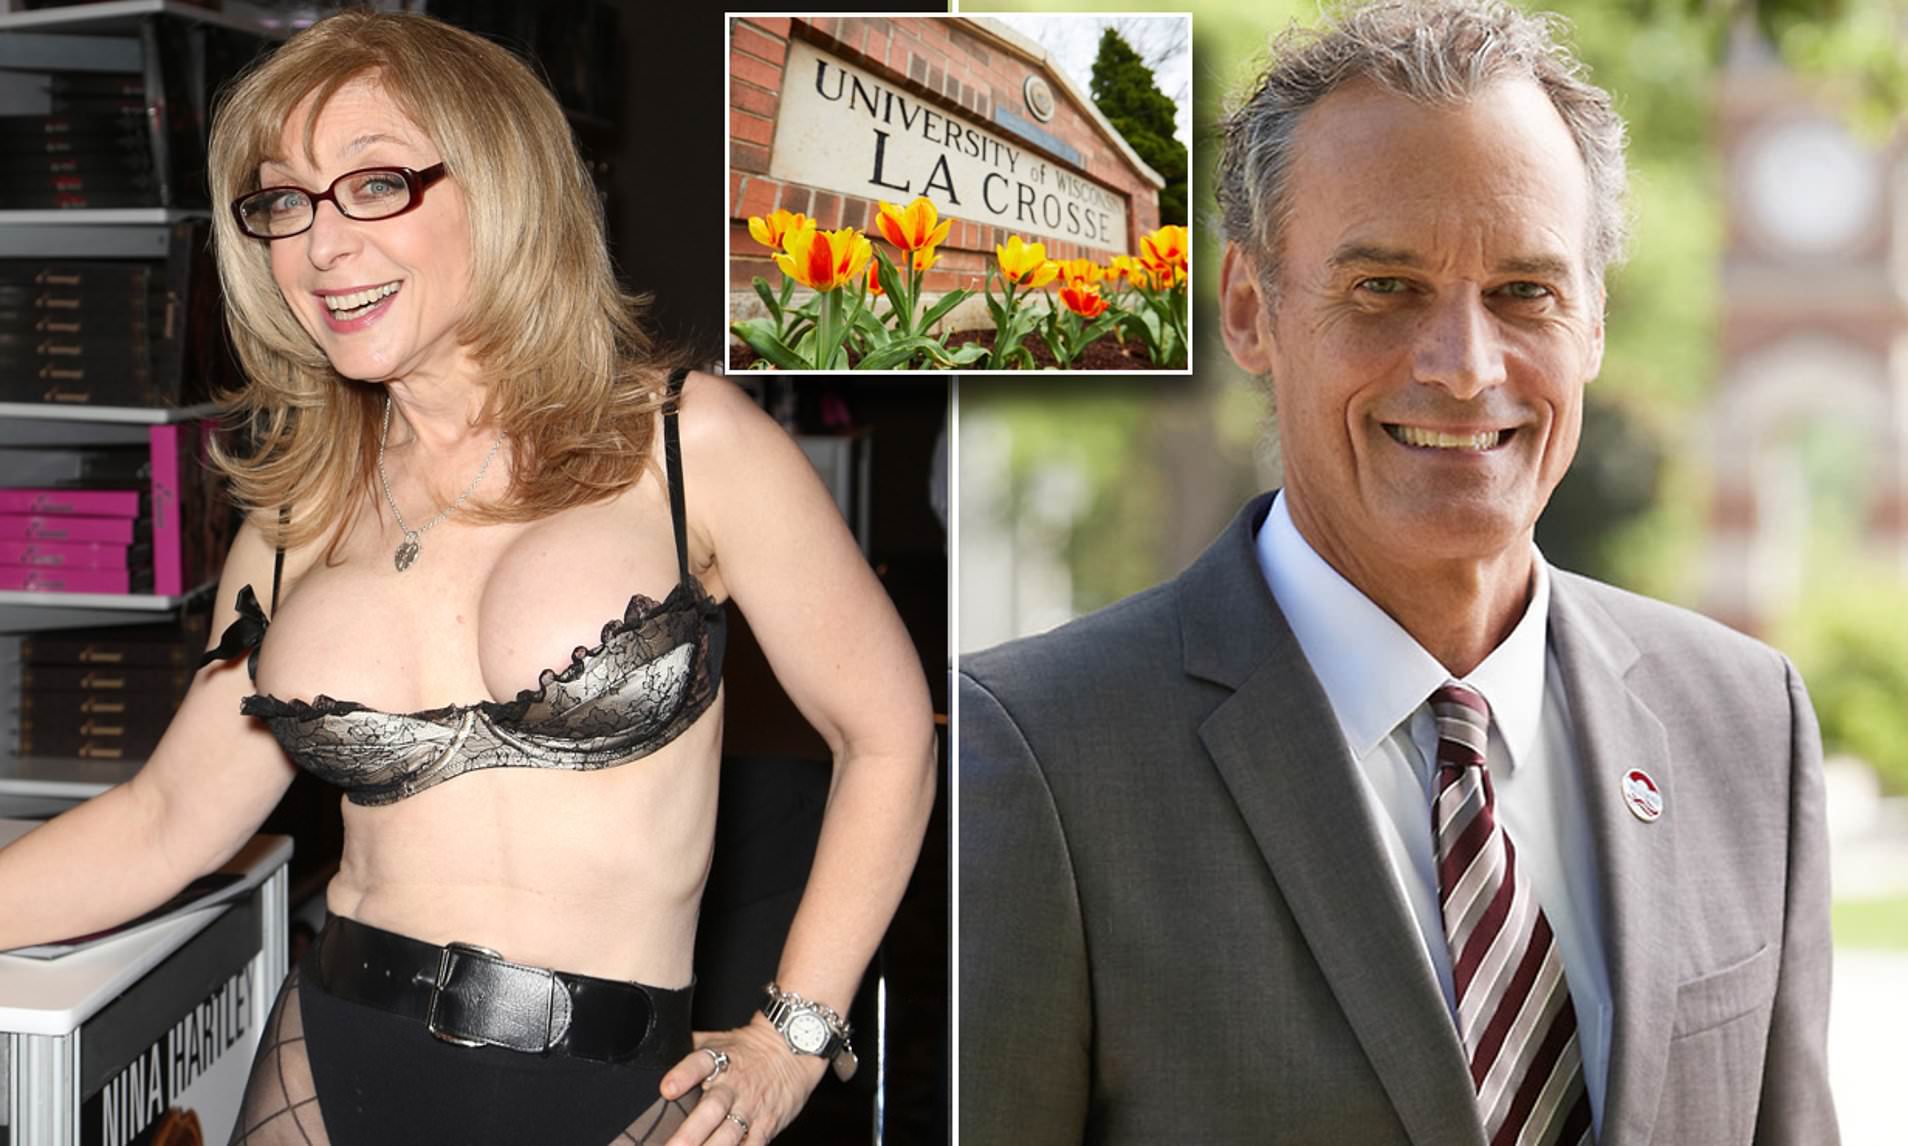 chanler bing recommends nina hartley real name pic